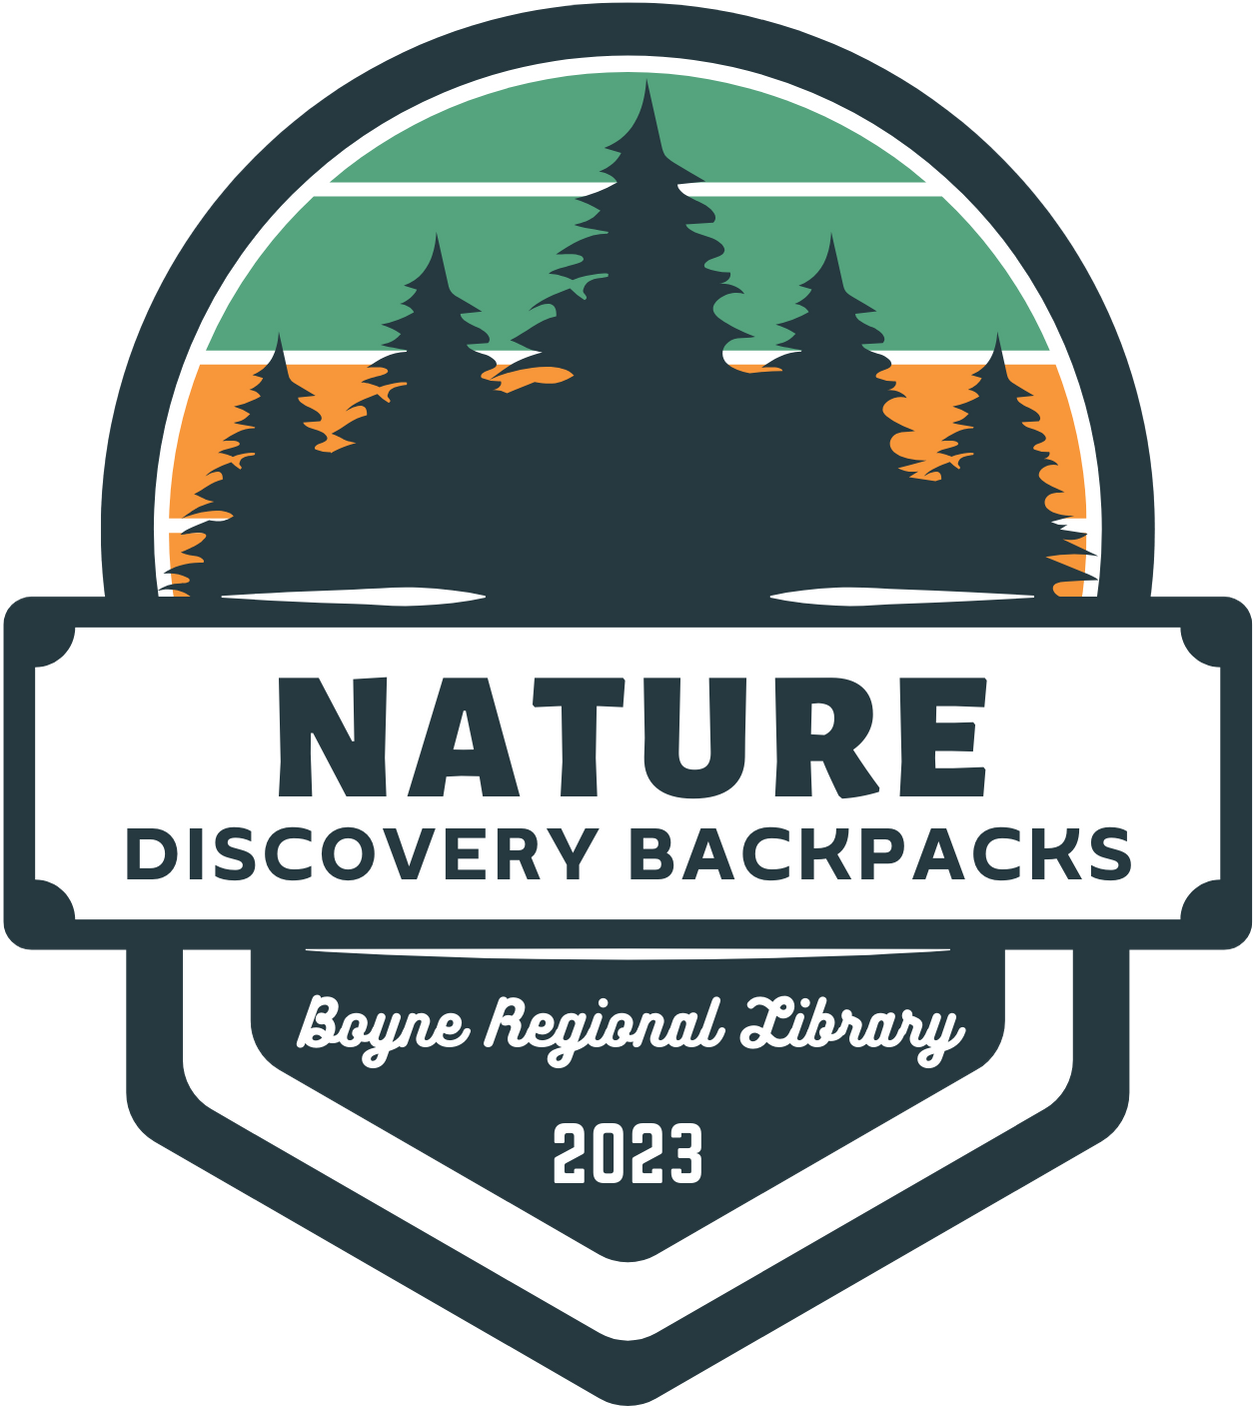 Link to Nature Discovery Backpacks Kiosk.